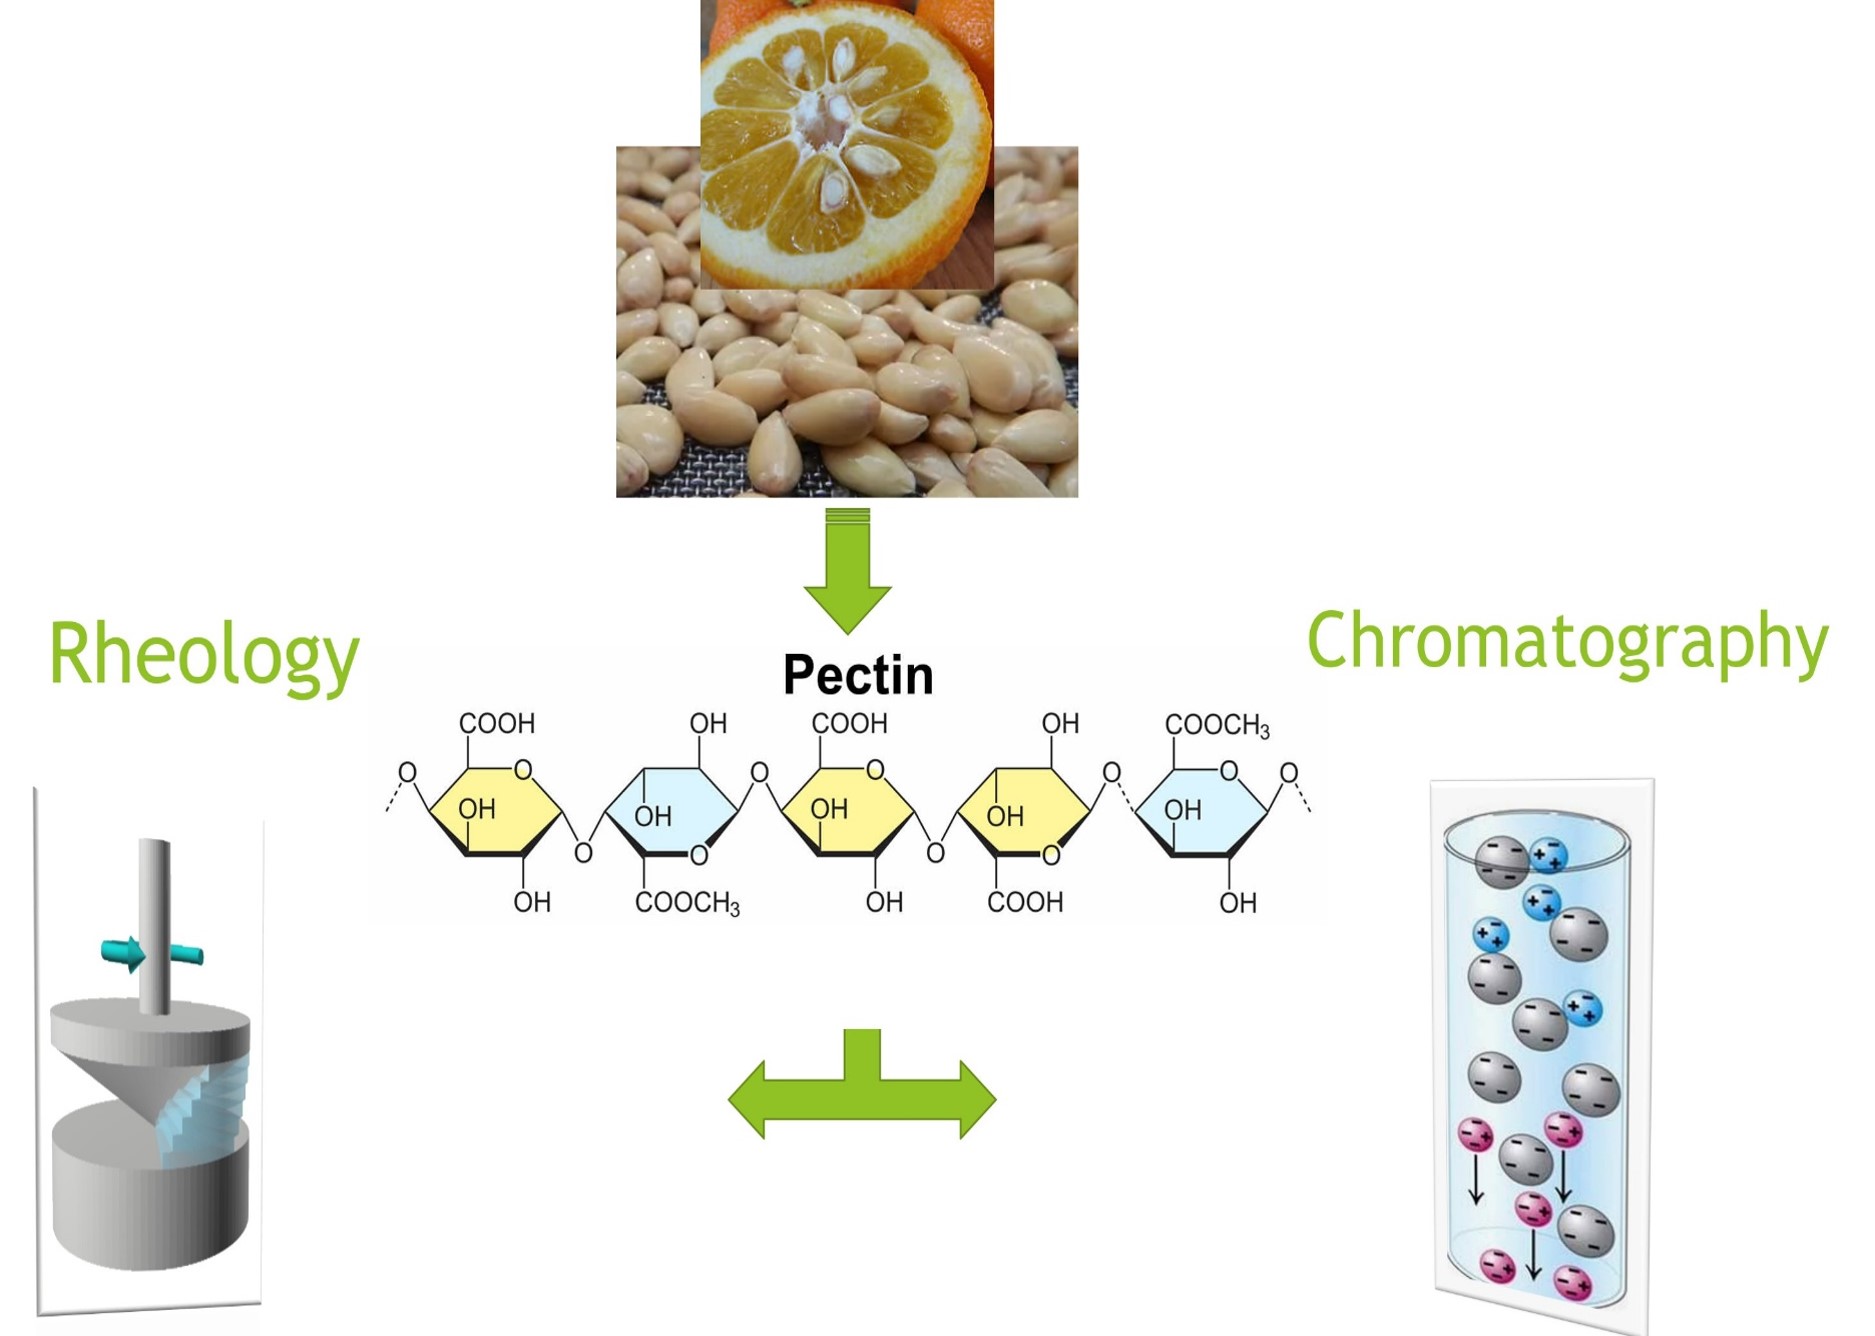 Utilization of Bitter Orange Seed as a Novel Pectin Source: Compositional and Rheological Characterization